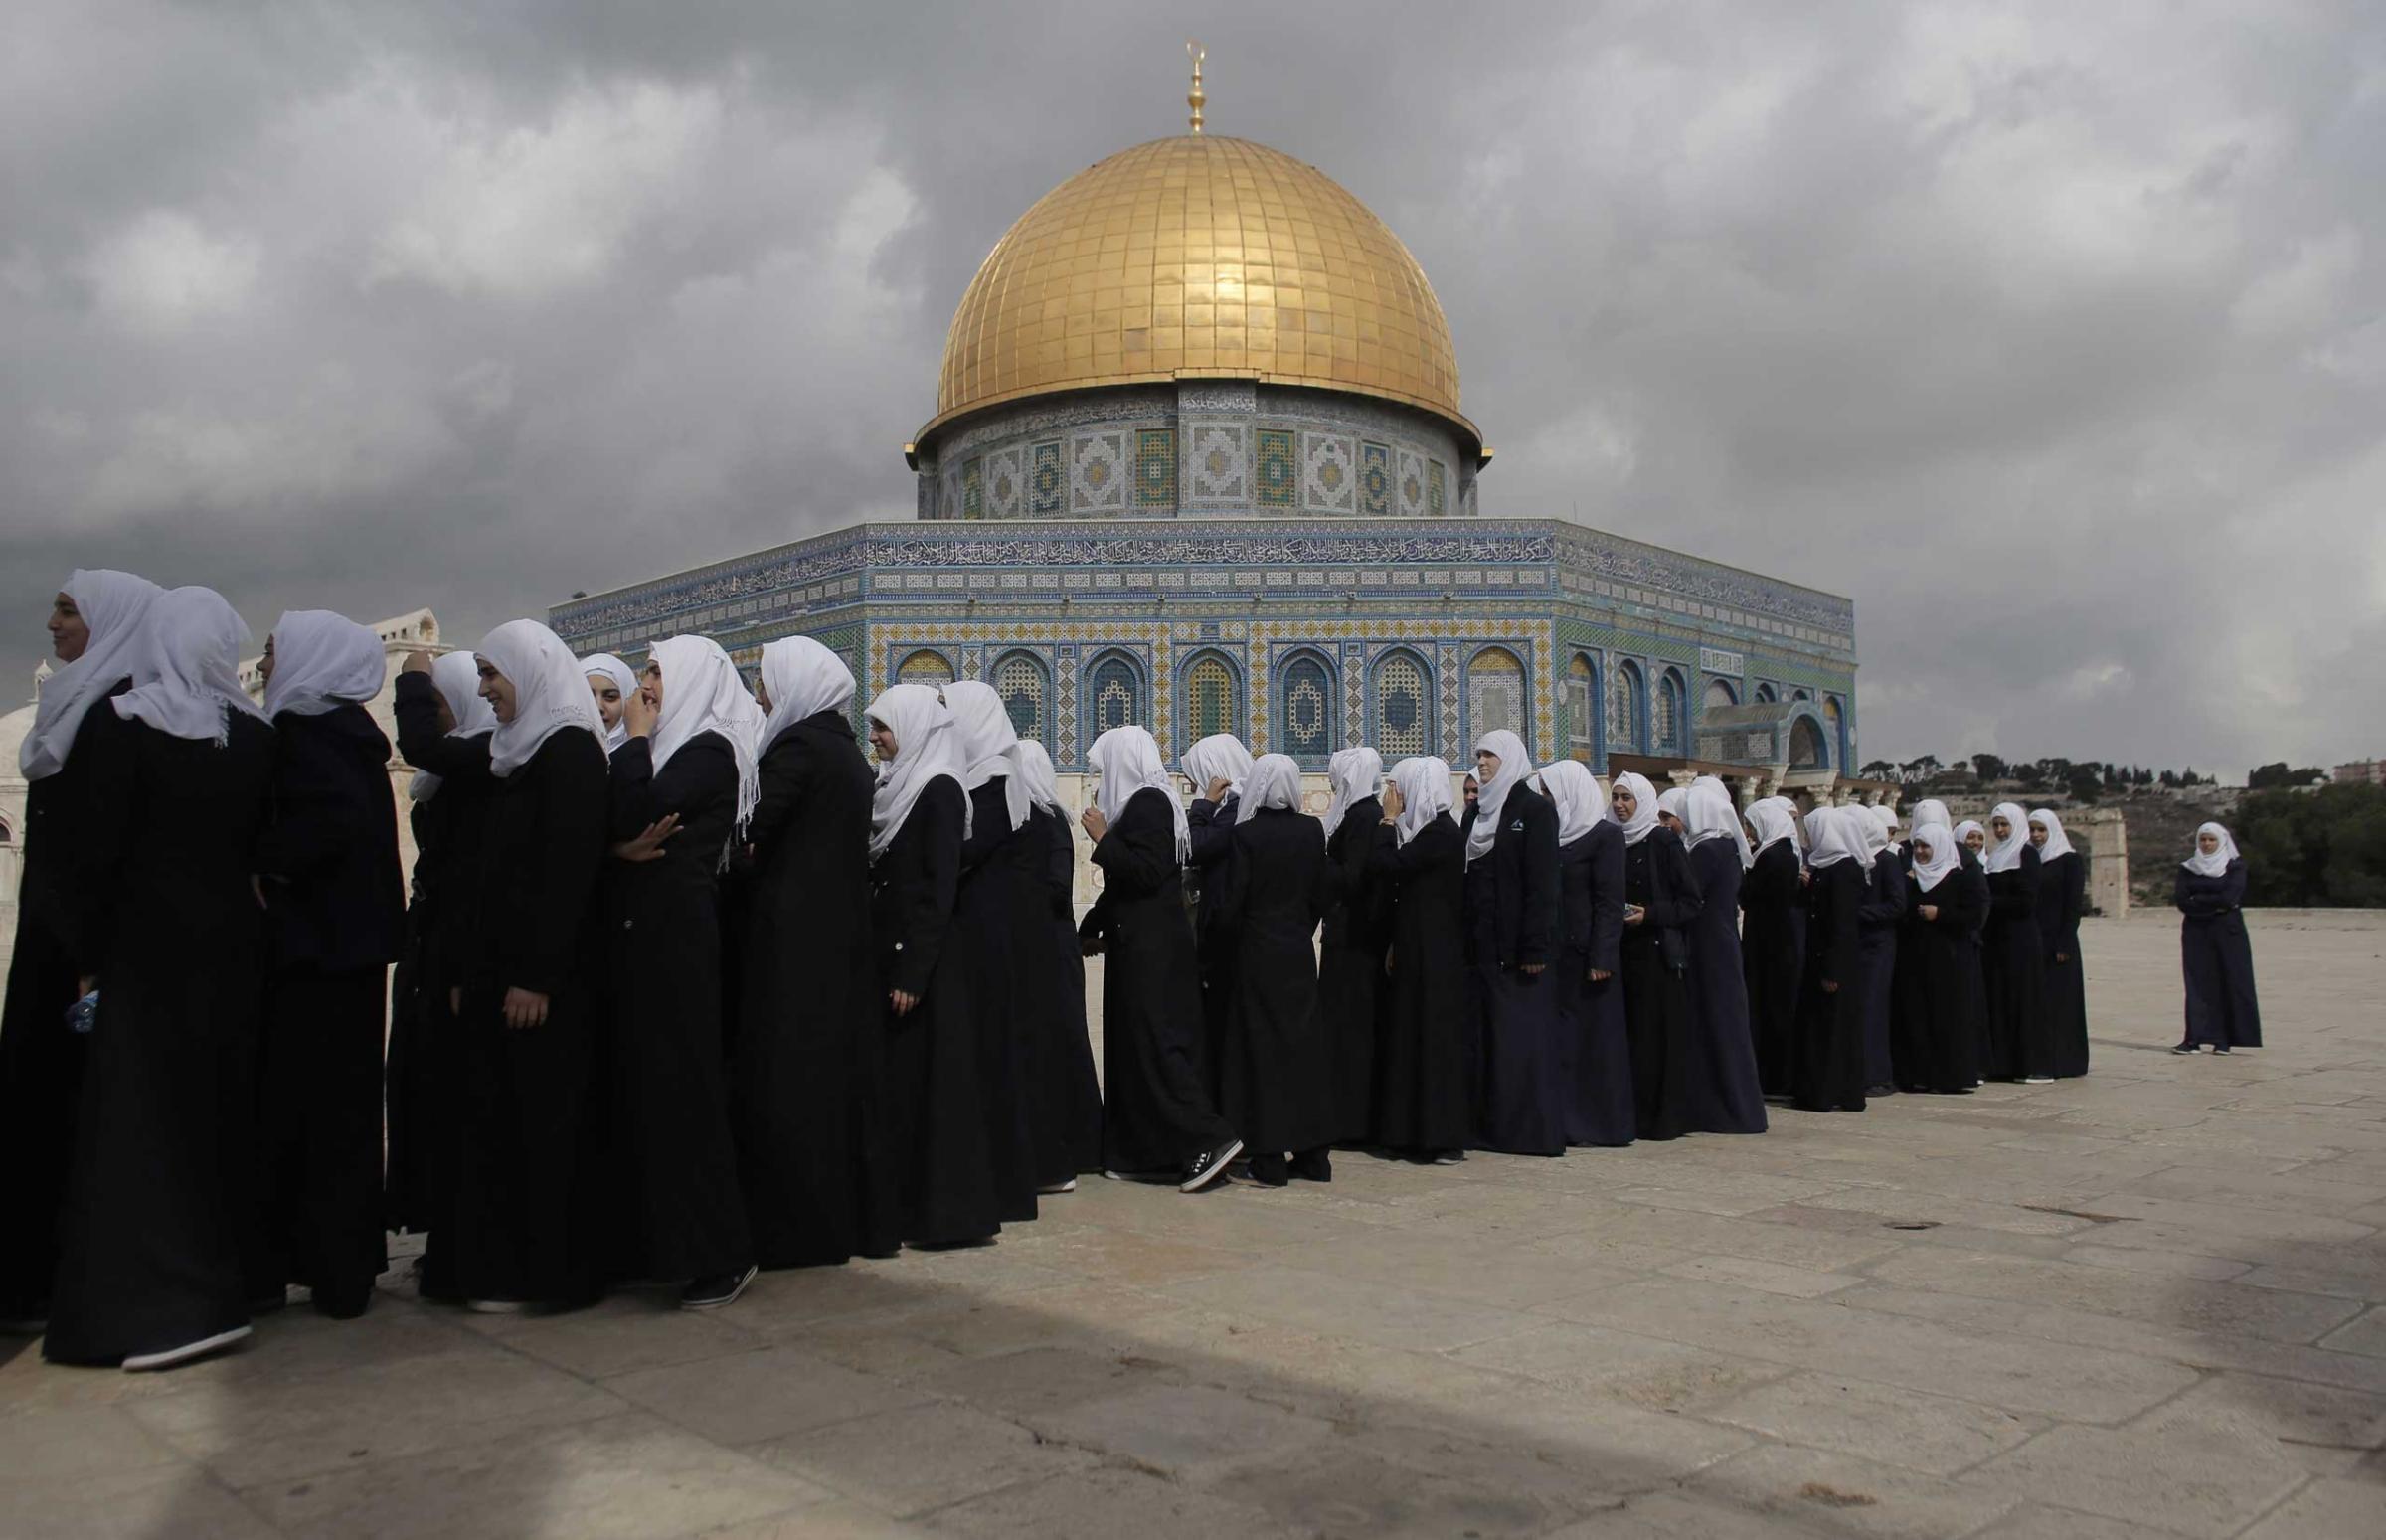 Palestinian school girls walk in line past the Dome of the Rock at the Al-Aqsa mosque compound in Jerusalem's Old City. Israeli Prime Minister Benjamin Netanyahu scrambled to contain inflammatory rhetoric from his government over the holy site, which is sacred to both Muslims and Jews, at the heart of a wave of deadly Palestinian unrest. Oct. 27, 2015